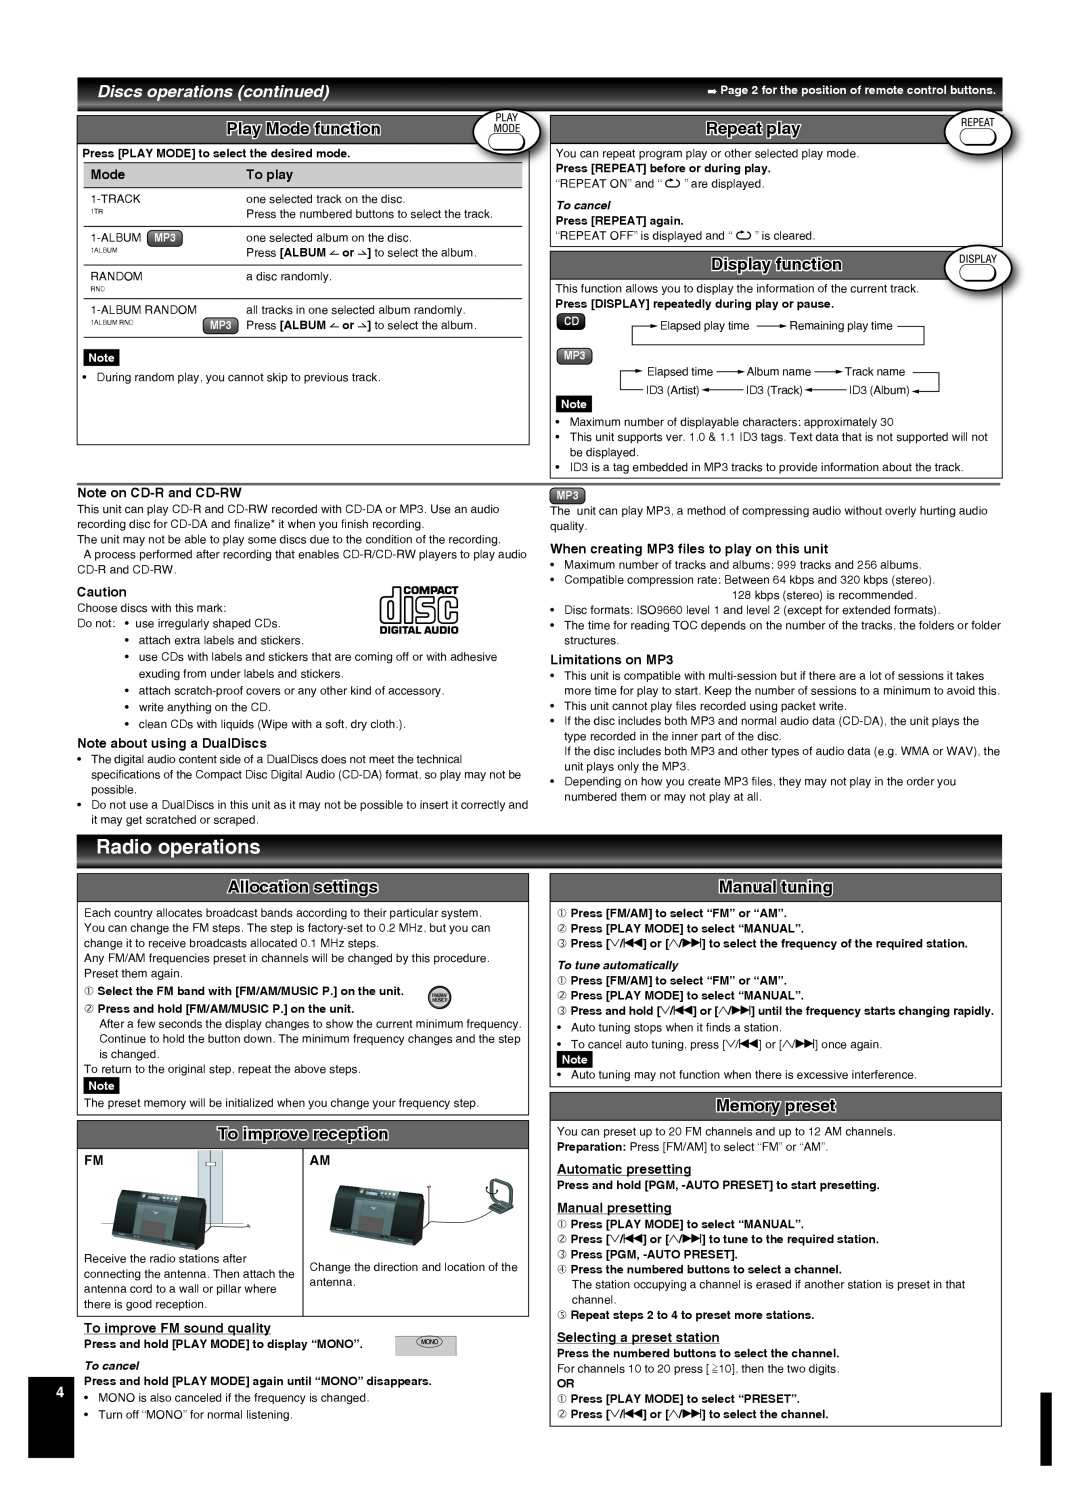 Panasonic SC-EN37 manual Radio operations, Play Mode function, Display function, Allocation settings, To improve reception 